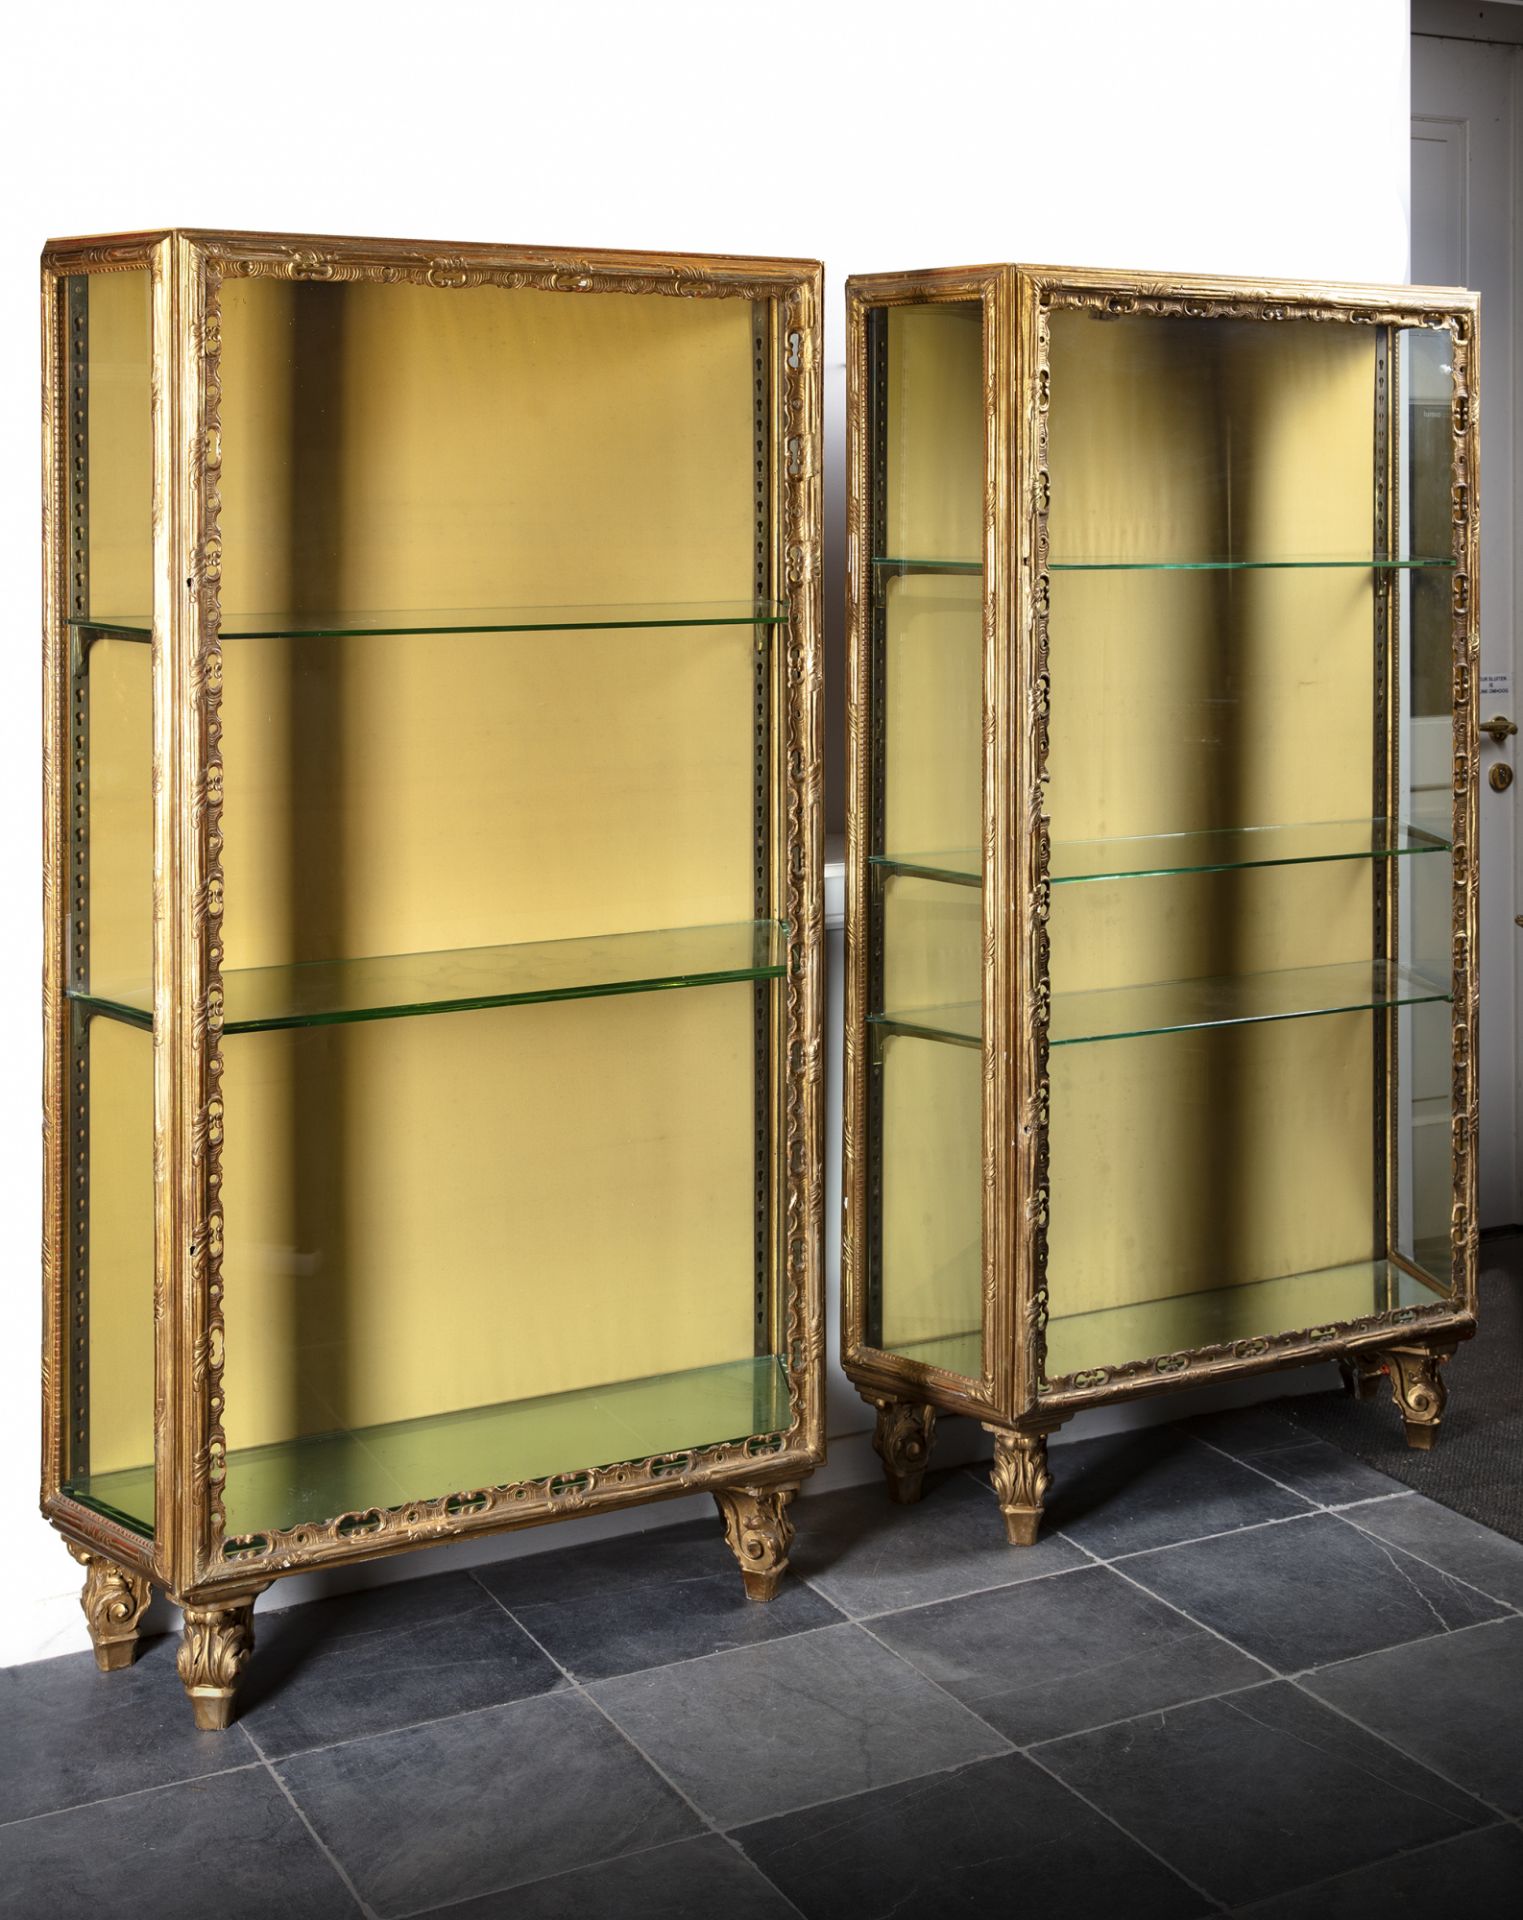 A PAIR OF FRENCH DISPLAY CABINETS, LATE 19TH CENTURY - Image 2 of 3